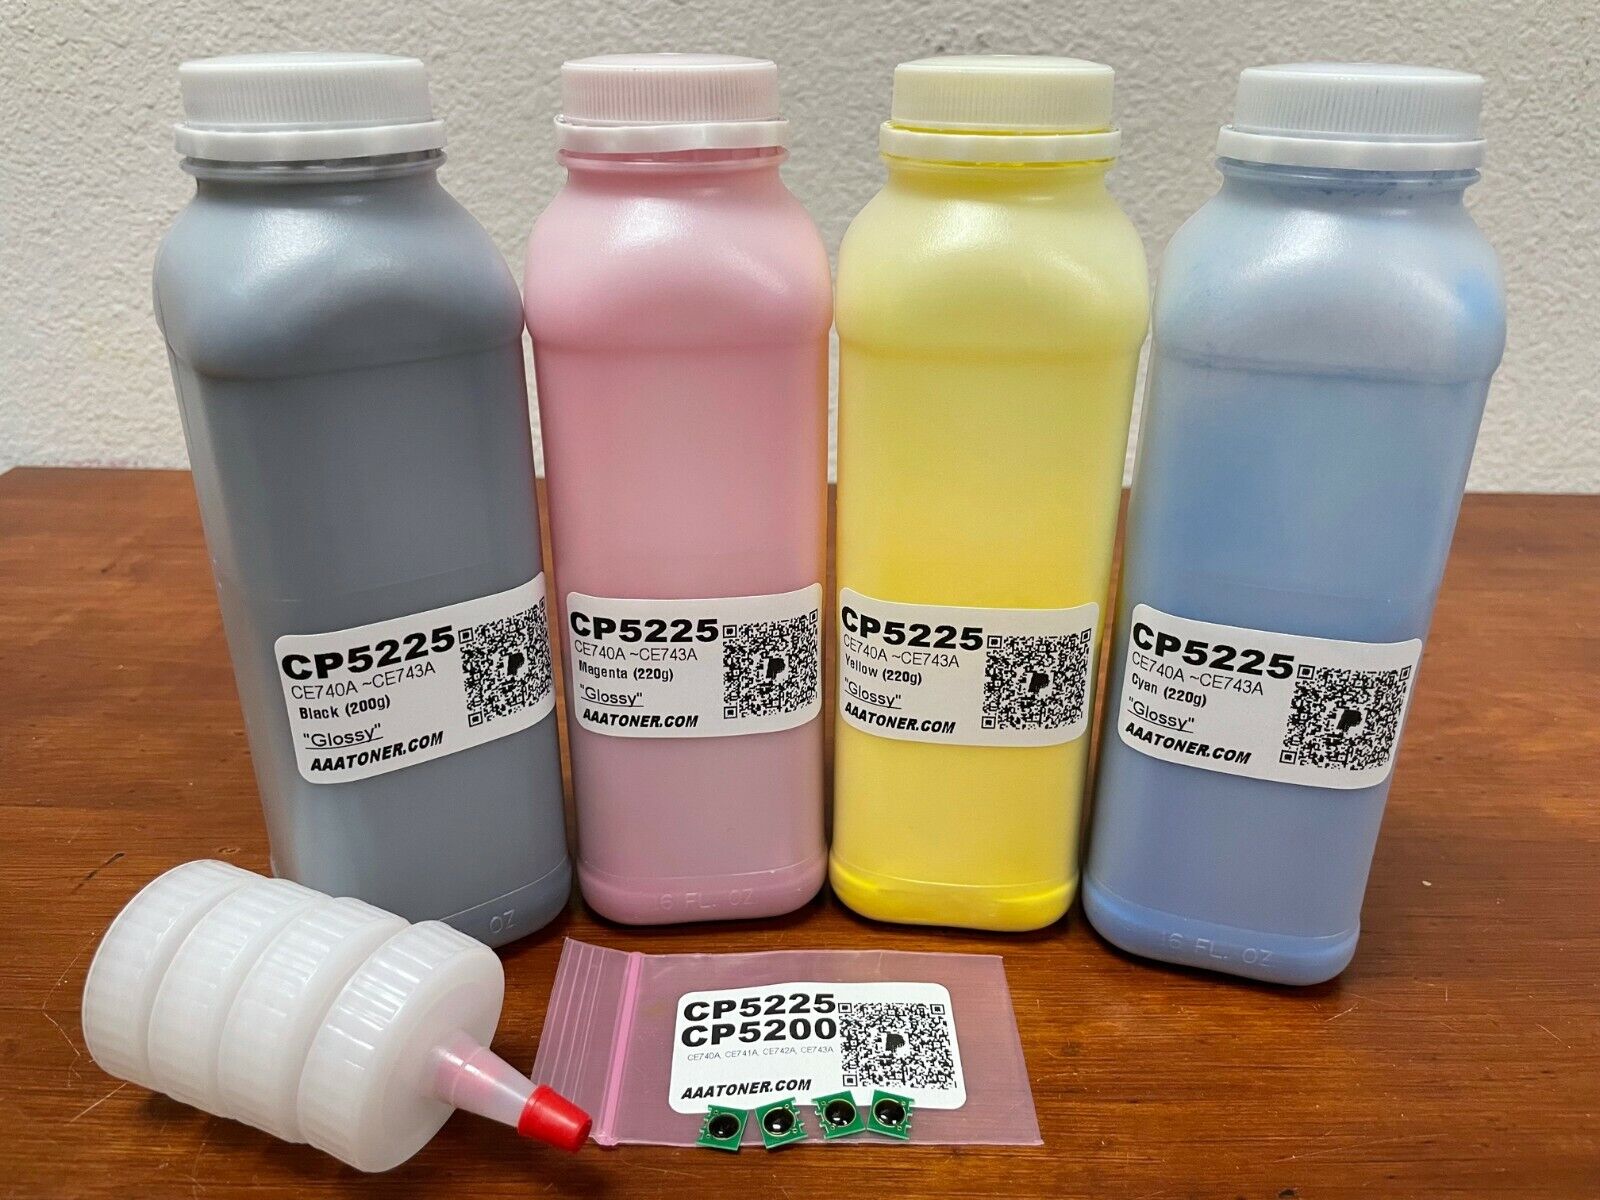 4 Toner Refill for HP Color Professional CP5200 CP5225 (CE740A ~CE743A) + 4 Chip